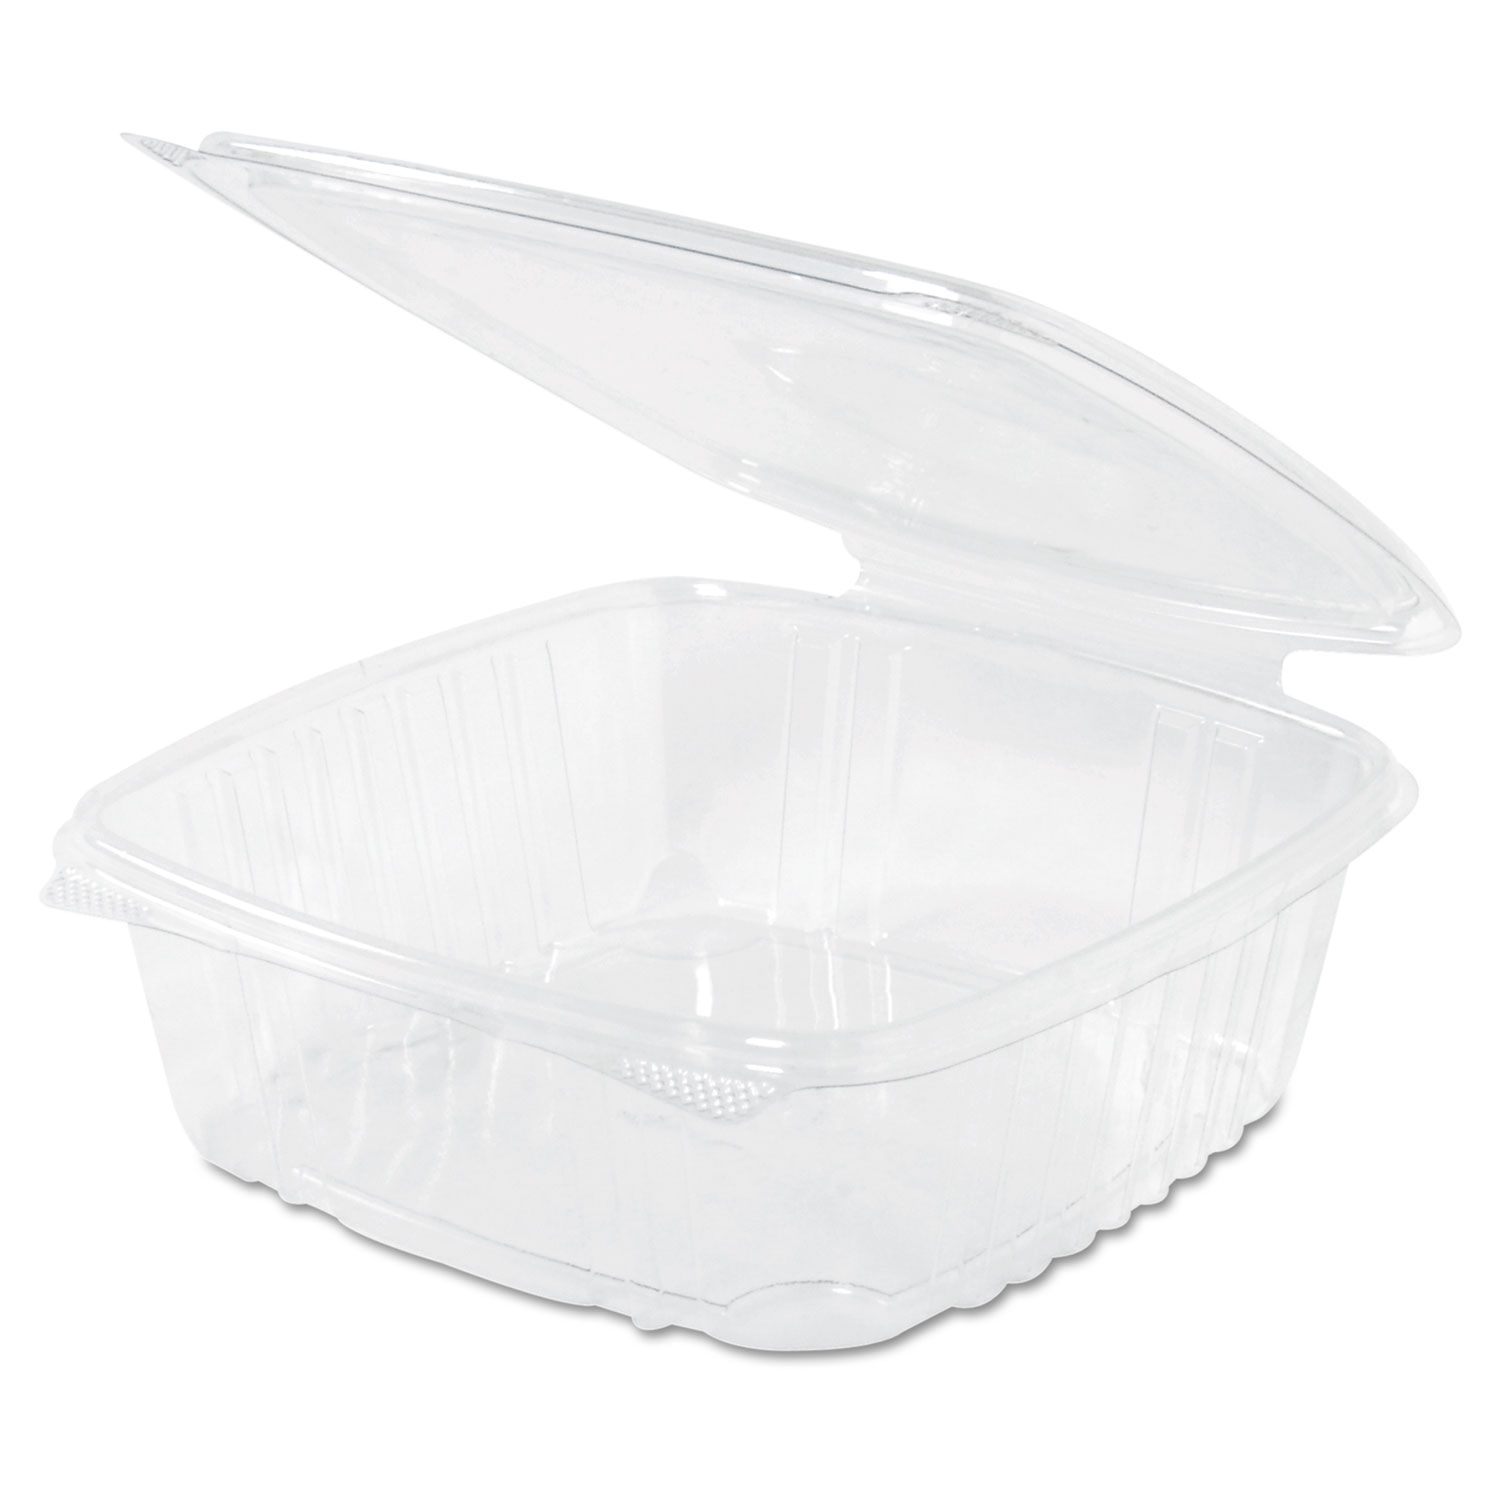 Genpak 32 oz. Clear Hinged Deli Container - 100/Pack